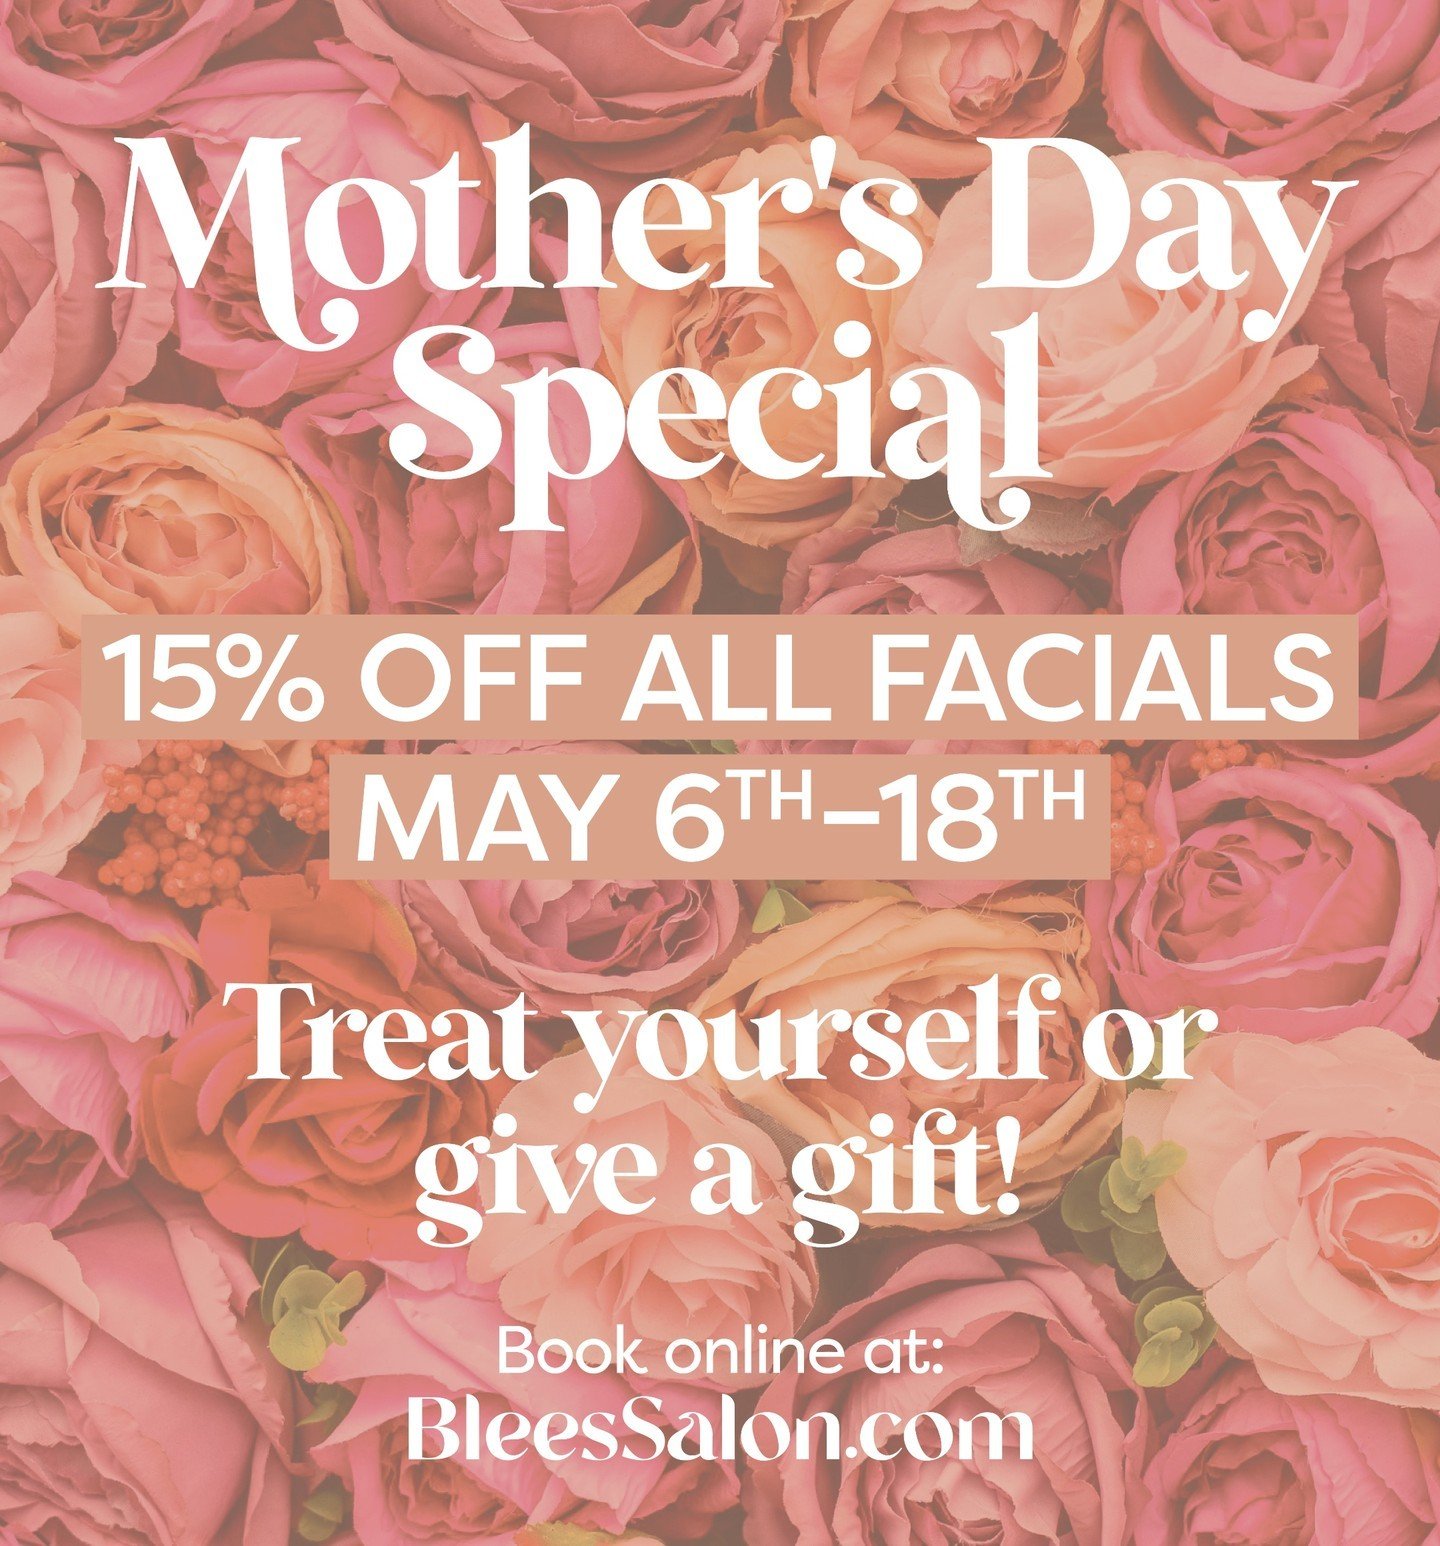 For the next two weeks, we'll be offering 15% off all facials in honor of Mother's Day. Anyone can take advantage of this deal! Call (518) 585-2557 or book online at BleesSalon.com